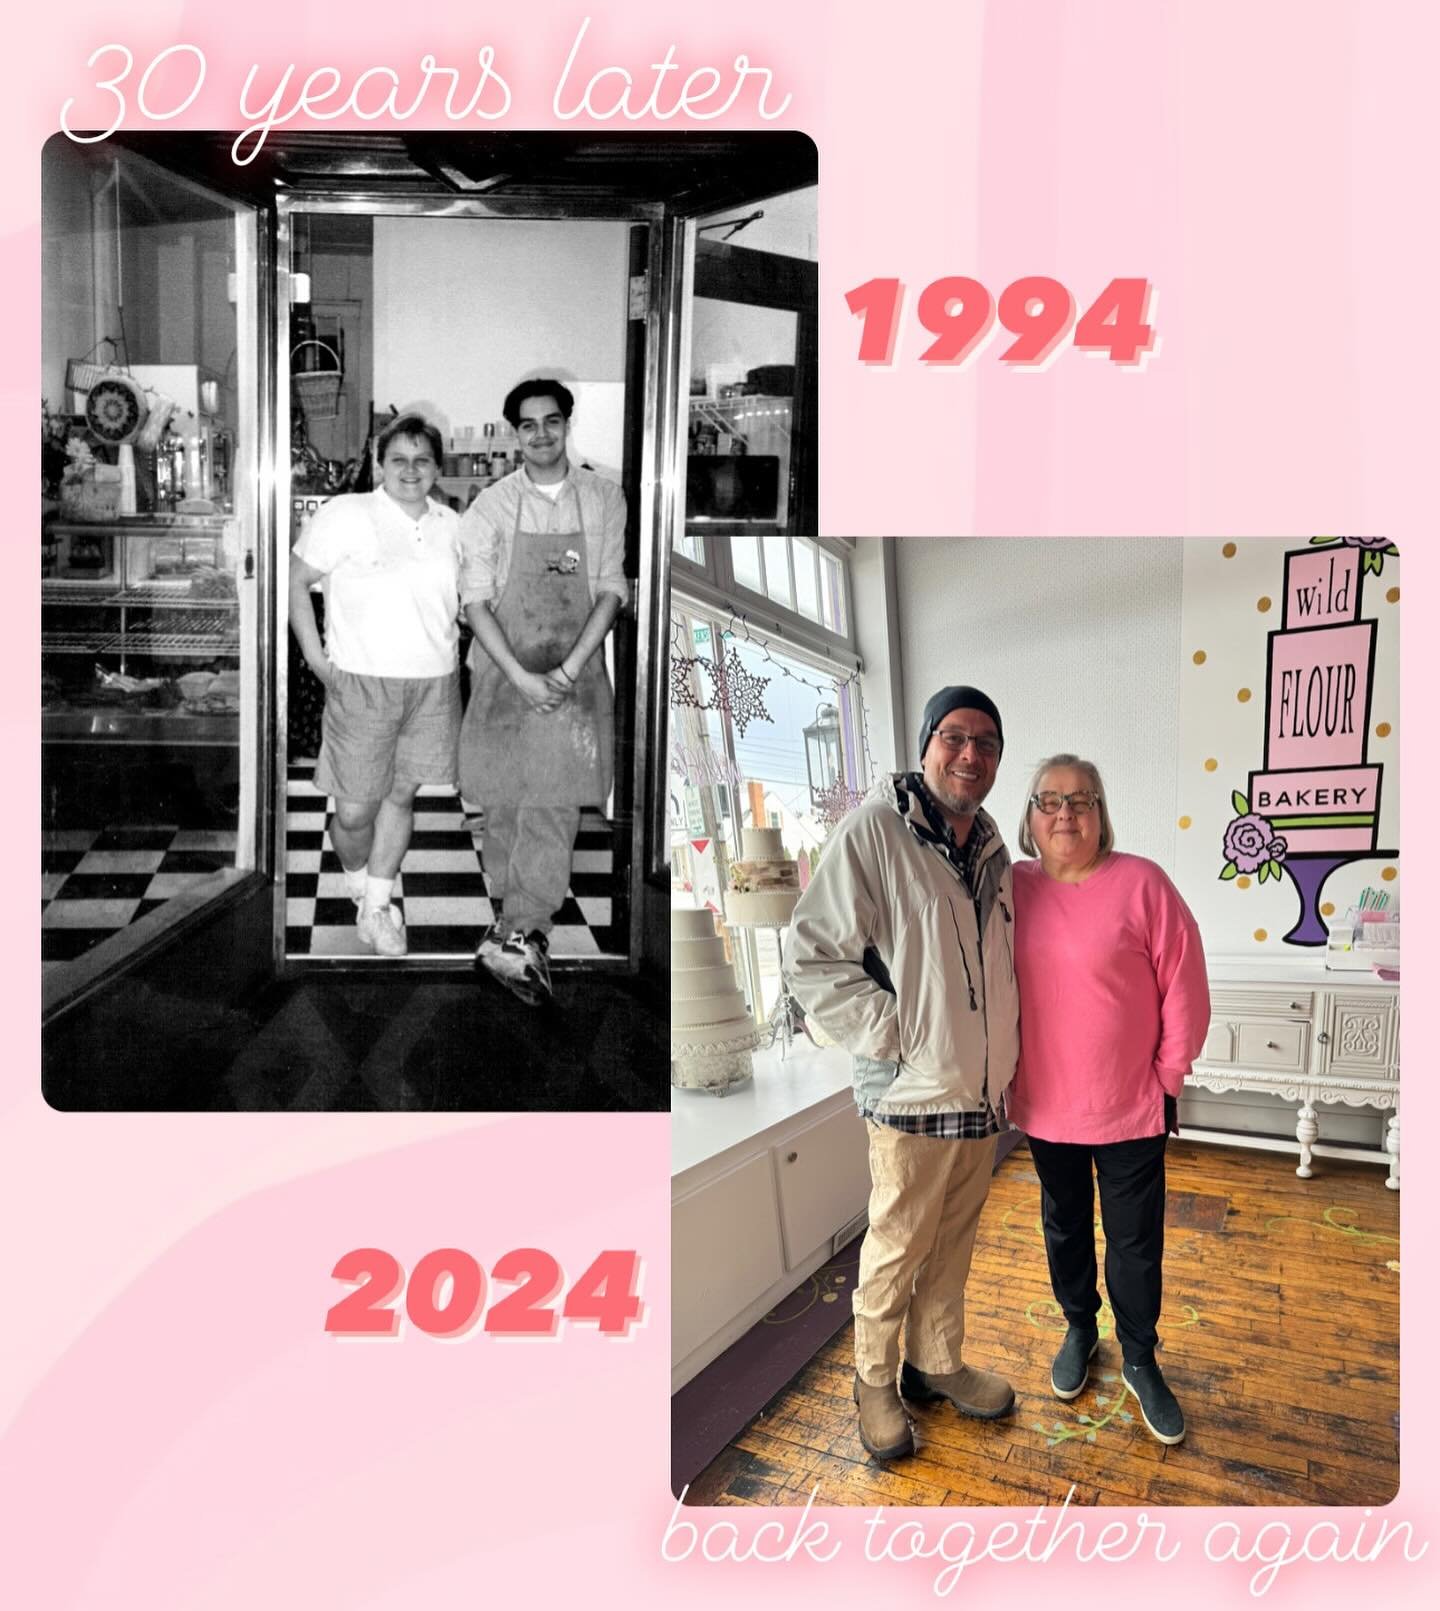 In just one week we will celebrate the day we opened our doors 30 years ago😍

In honor of this momentous day, we recreated our iconic 1994 photo of Sue and THE original flourette, Raymond💗🧑&zwj;🍳

Even after all this time, there is so much love a